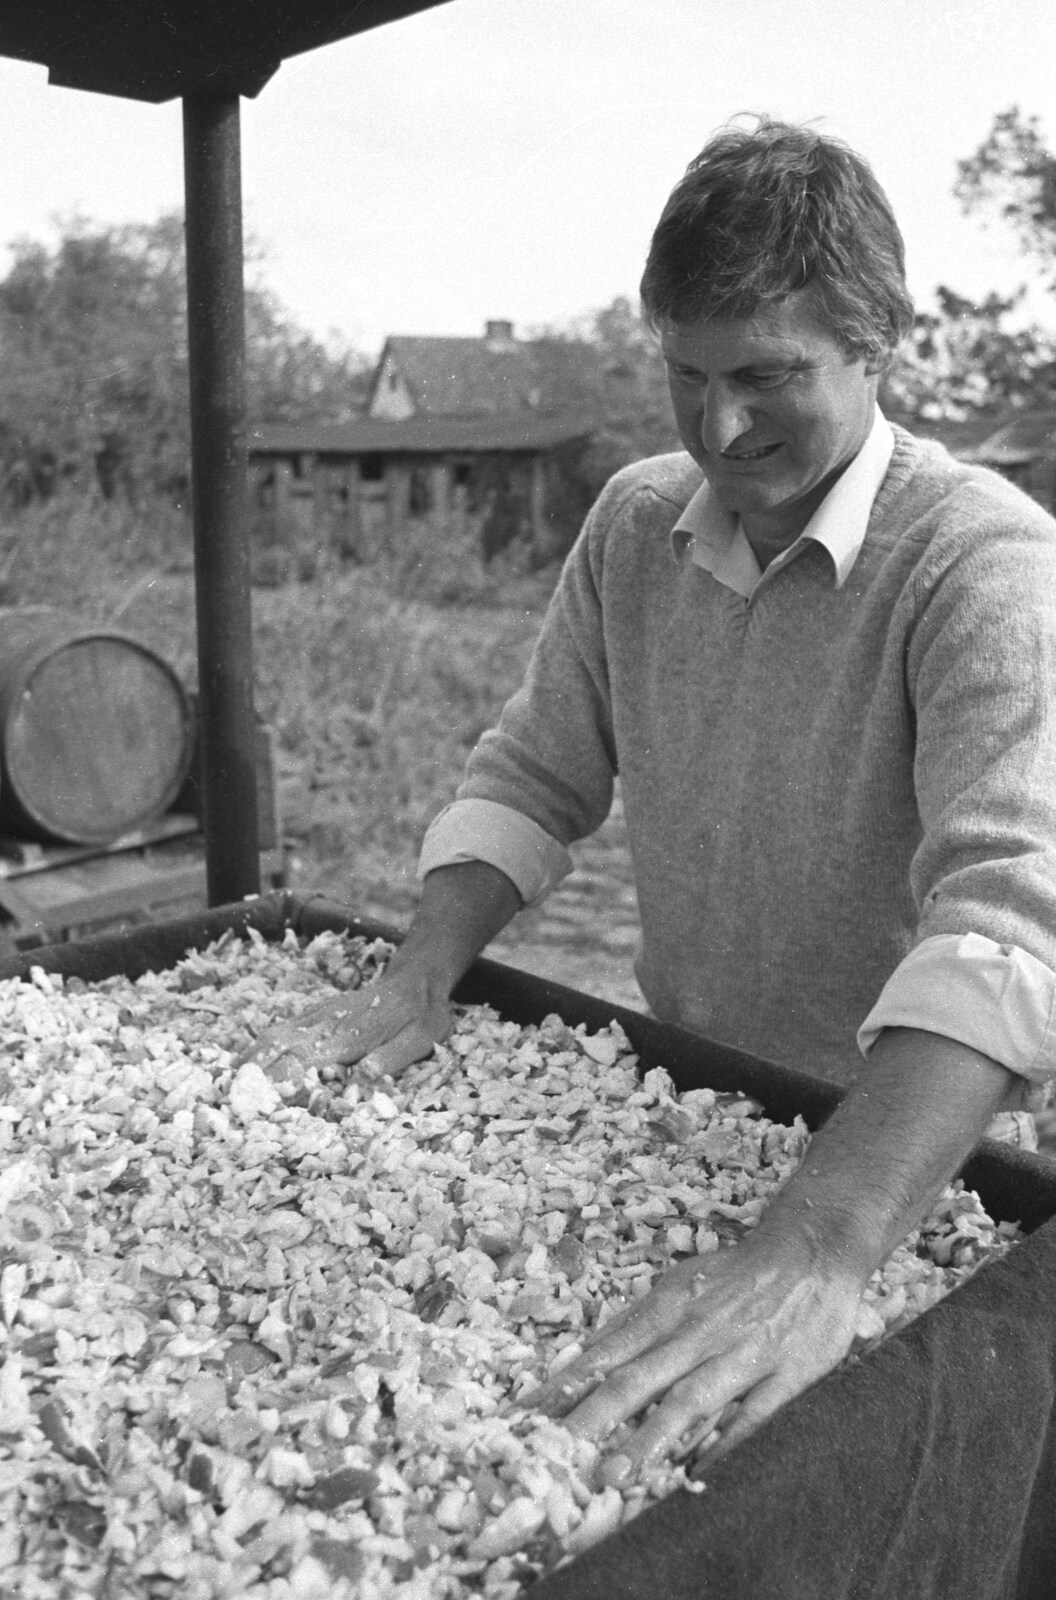 Geoff spreads apple around from Cider Making in Black and White, Stuston, Suffolk - 11th October 1992